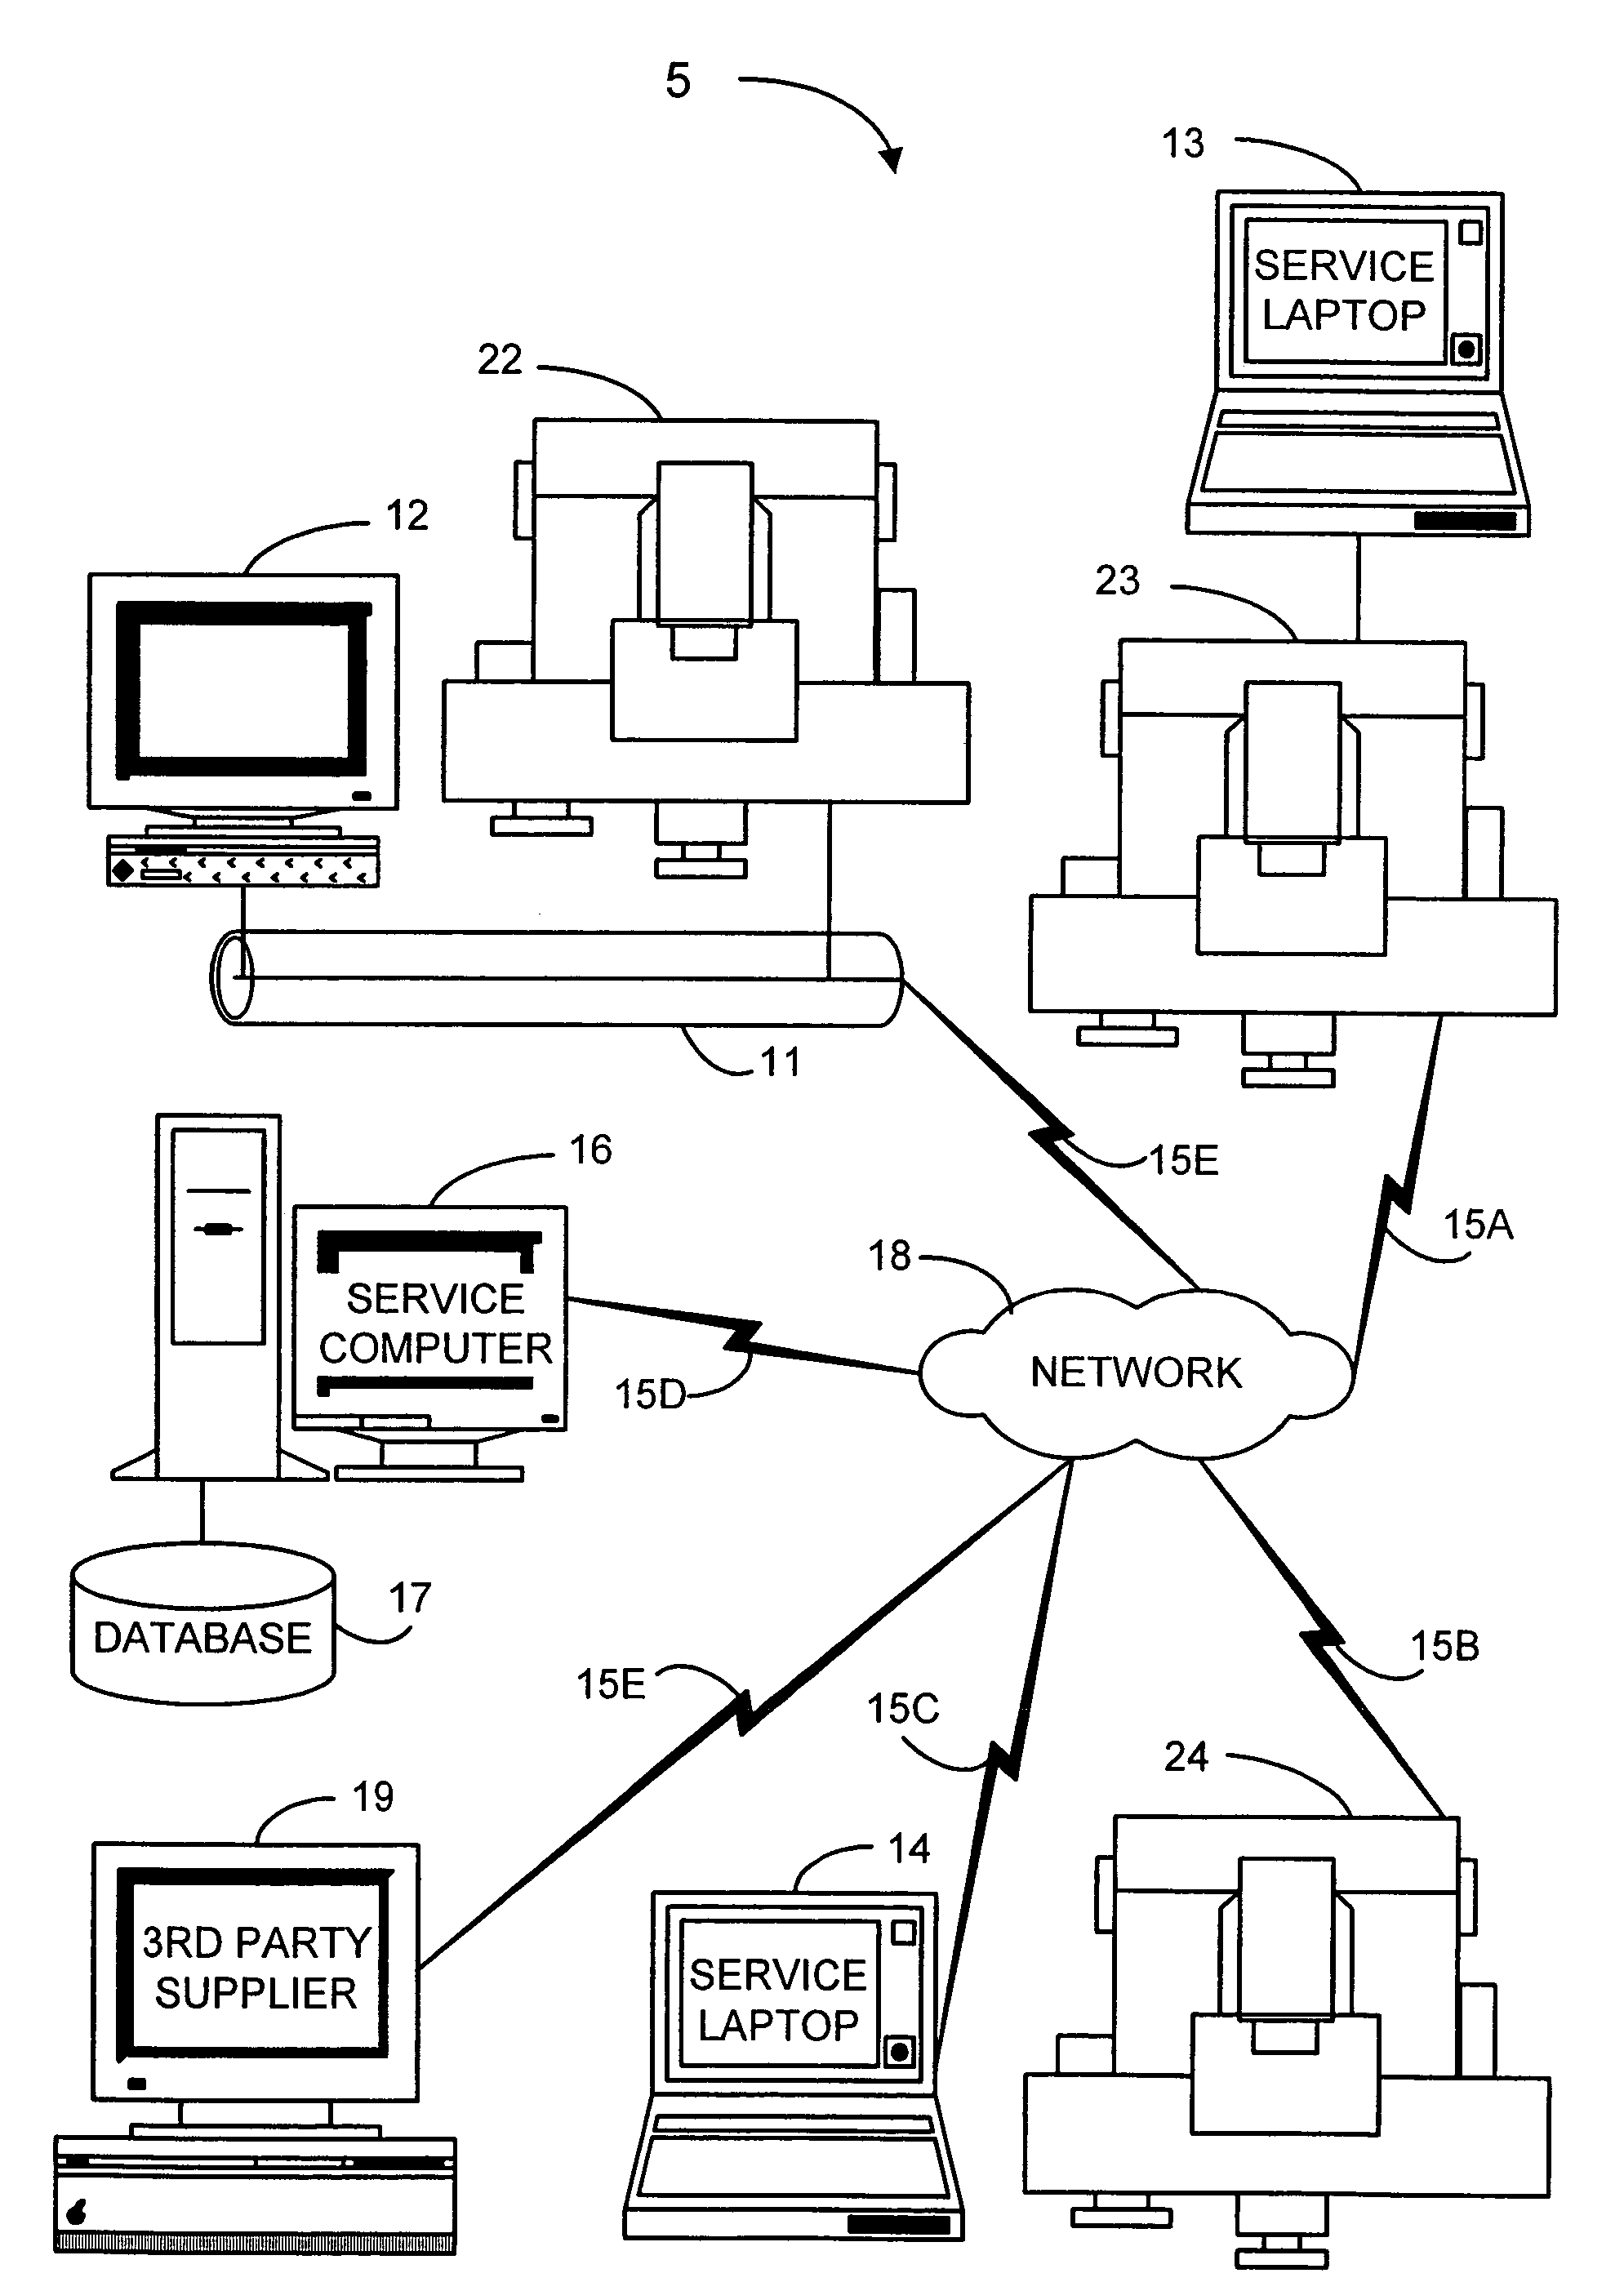 Operational control system and a system providing for remote monitoring of a manufacturing device